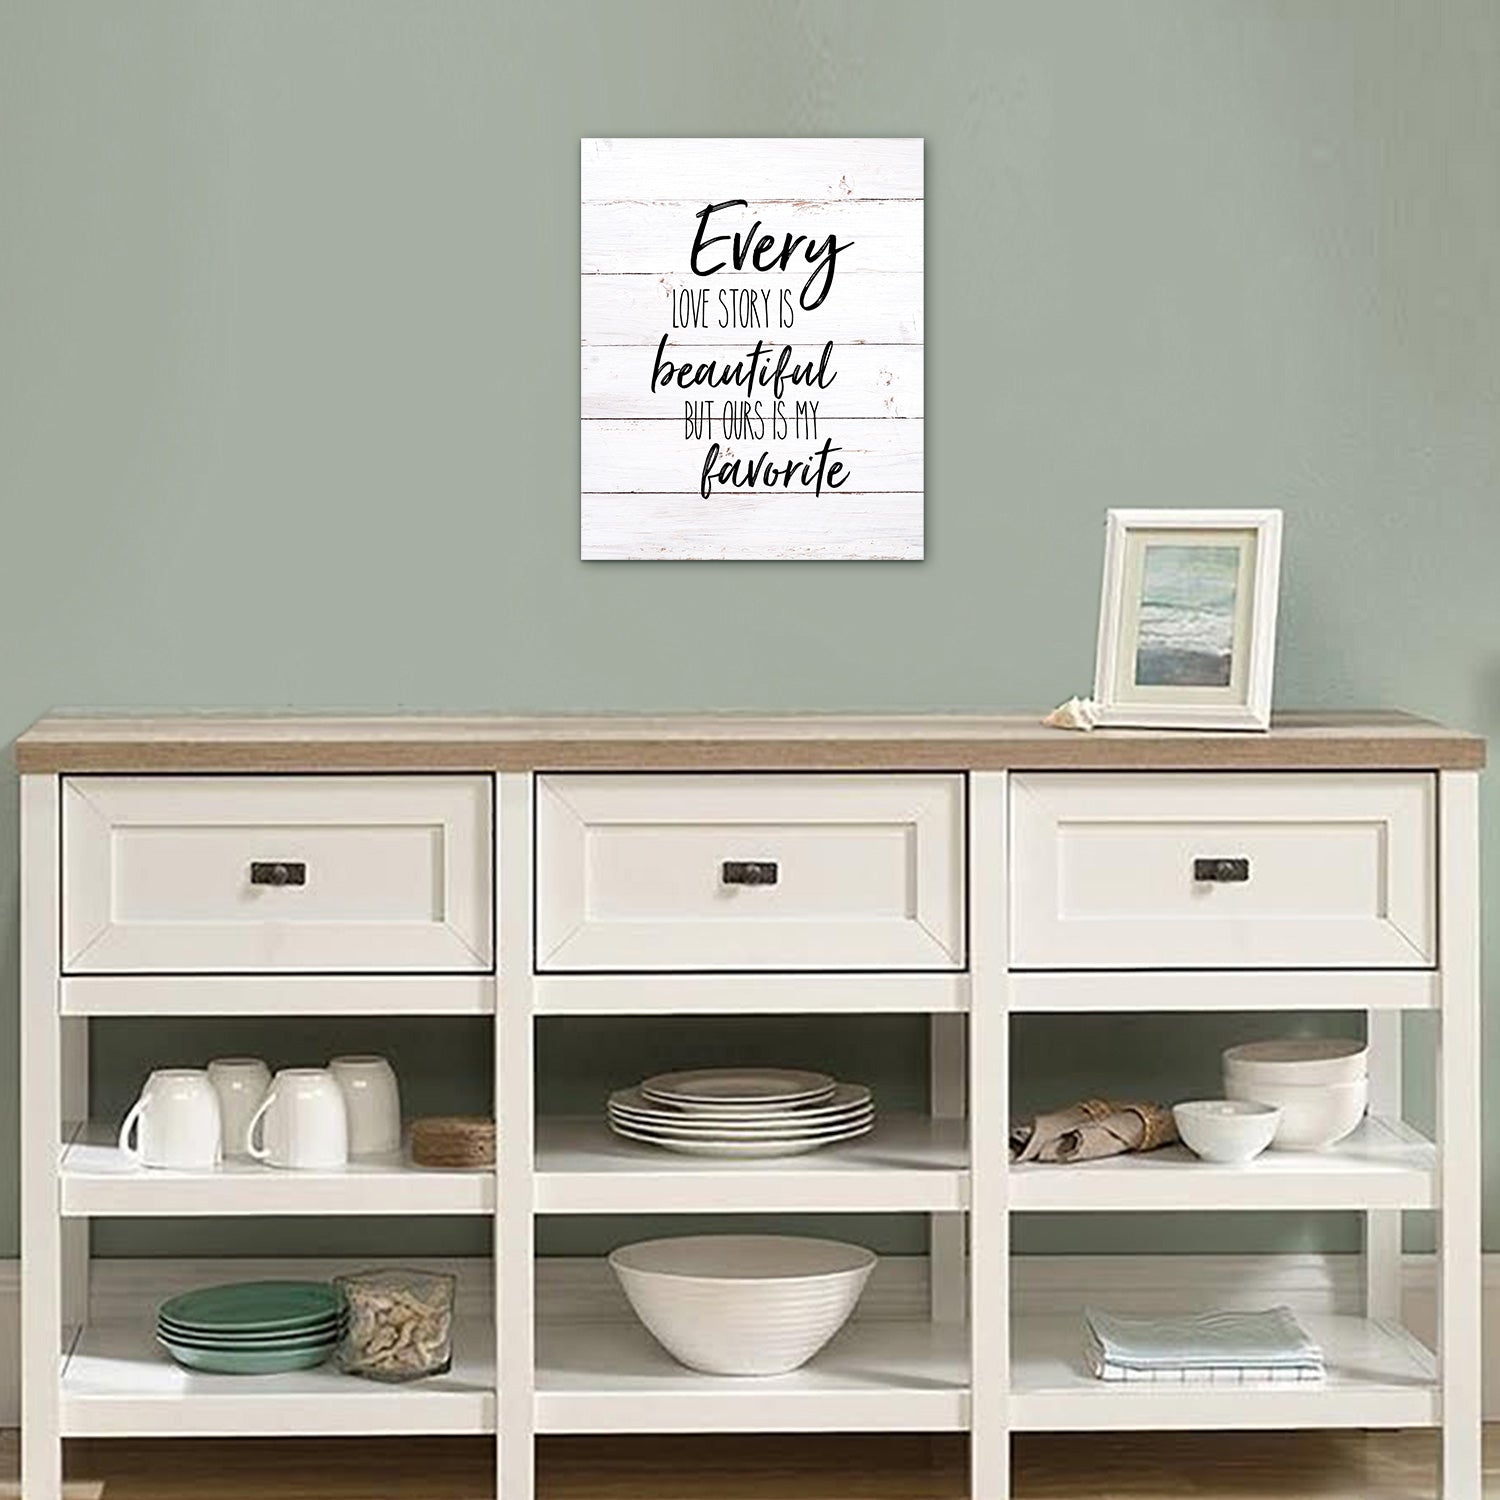 Every Day Inspirational Hanging Wall Plaque - Today Is A Good Day - LifeSong Milestones